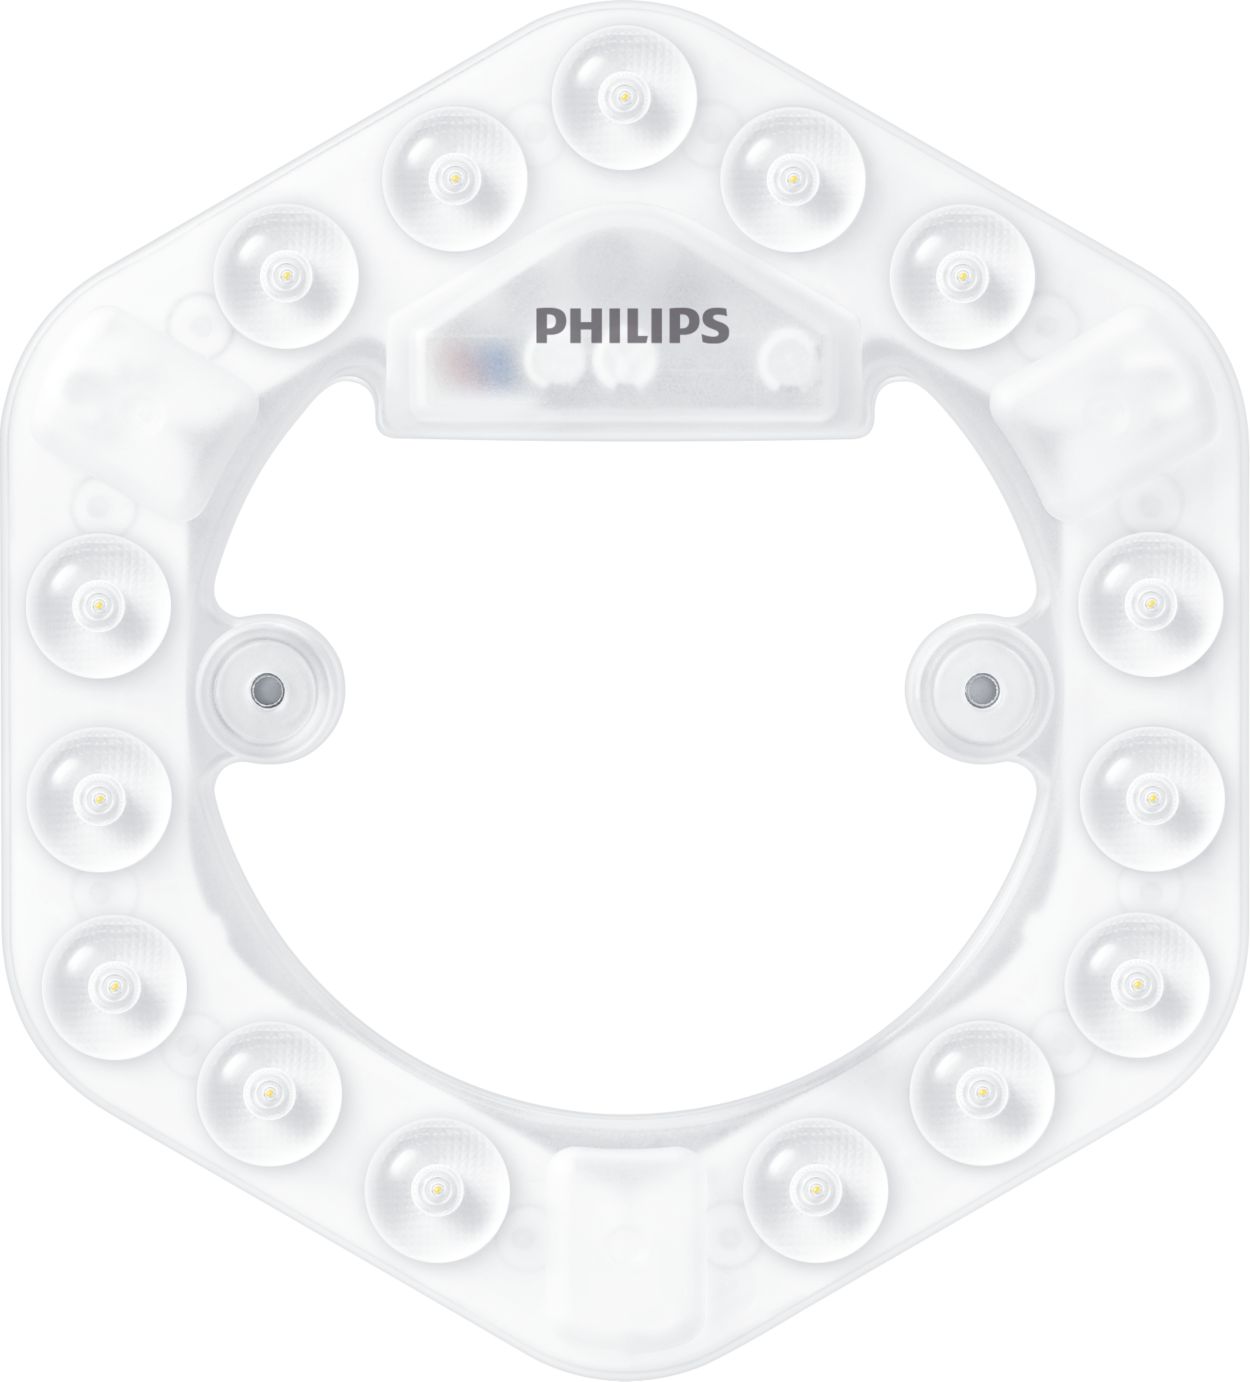 A superior replacement solution for the light source in ceiling luminaire